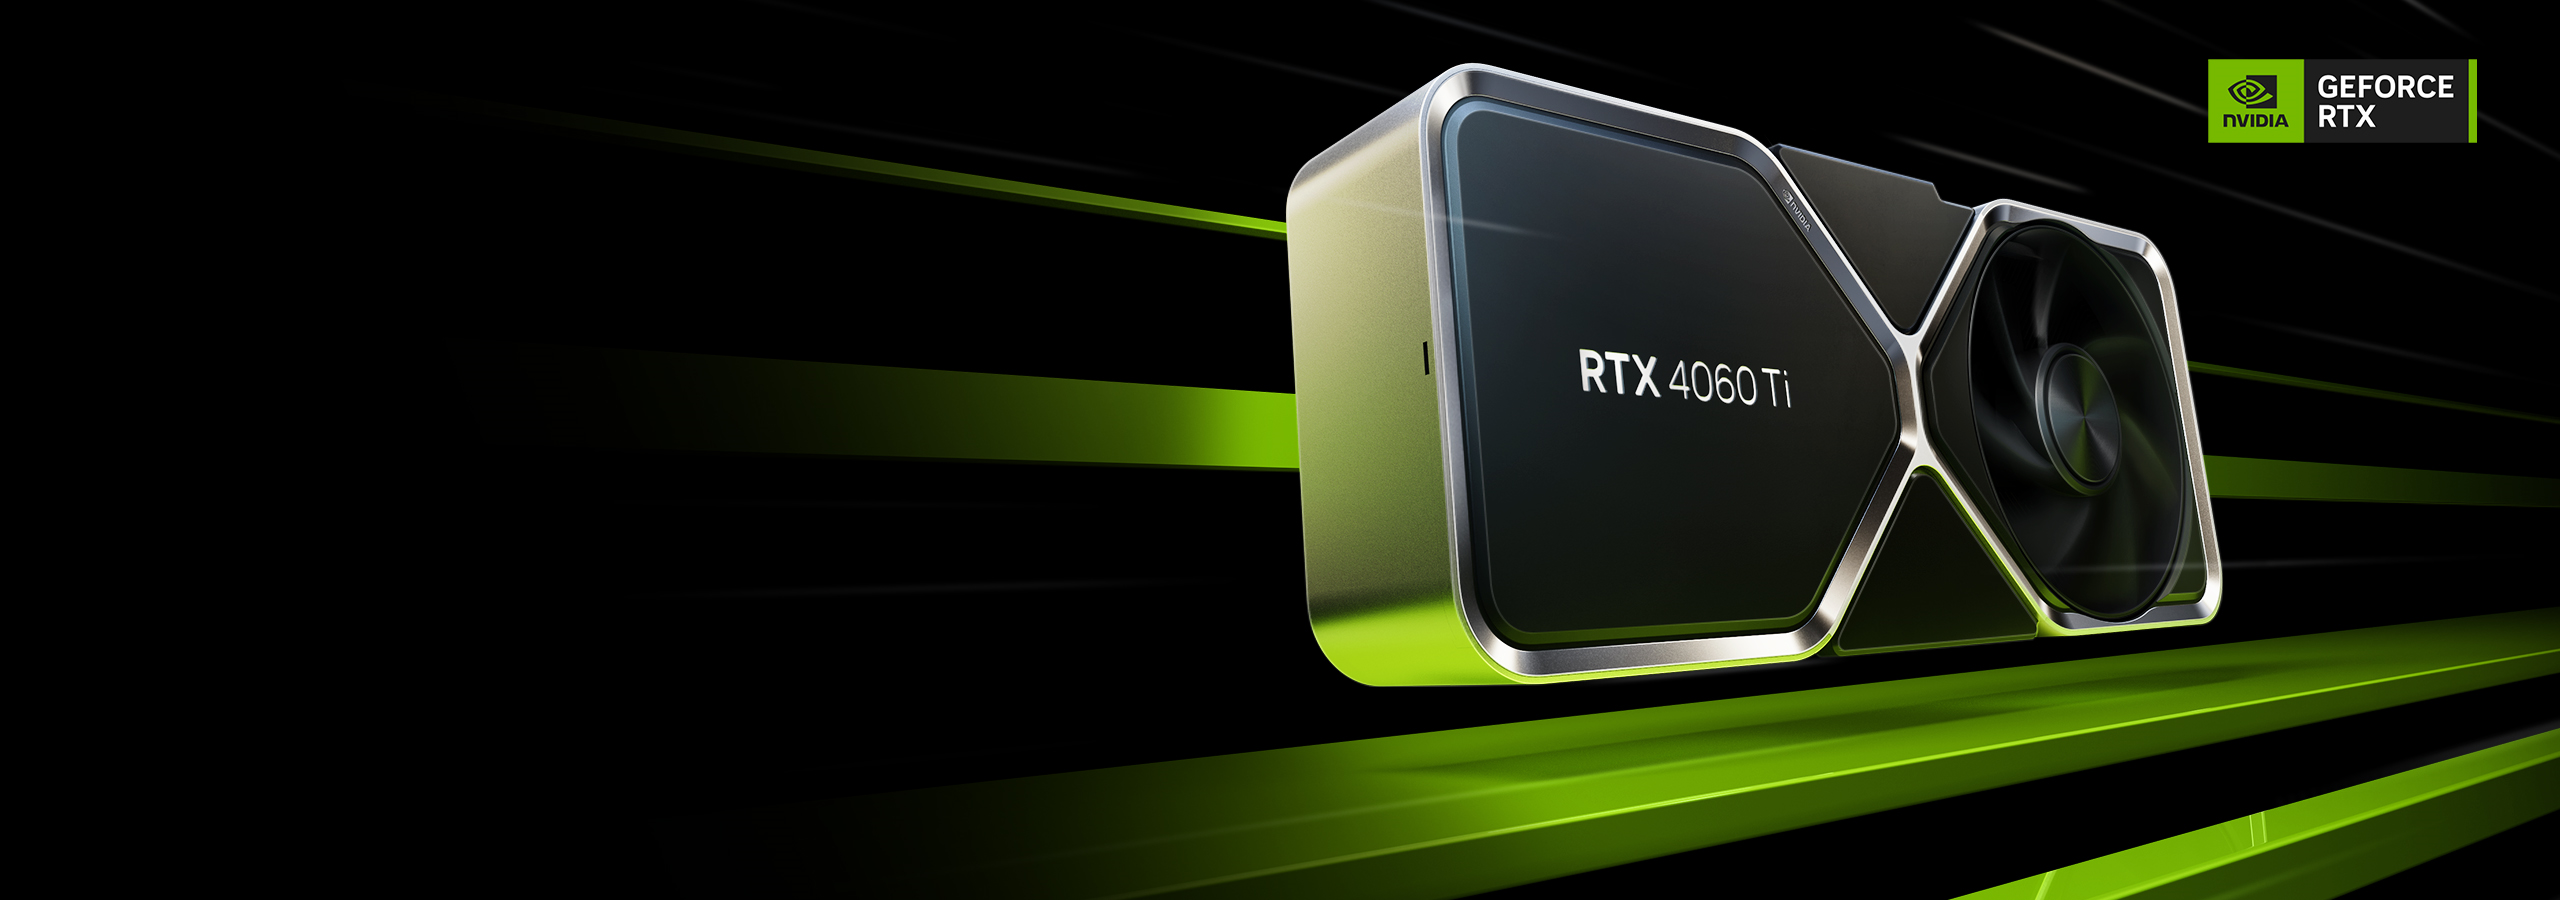 Upgrade to an ORIGIN PC with an NVIDIA GeForce RTX 4060Ti